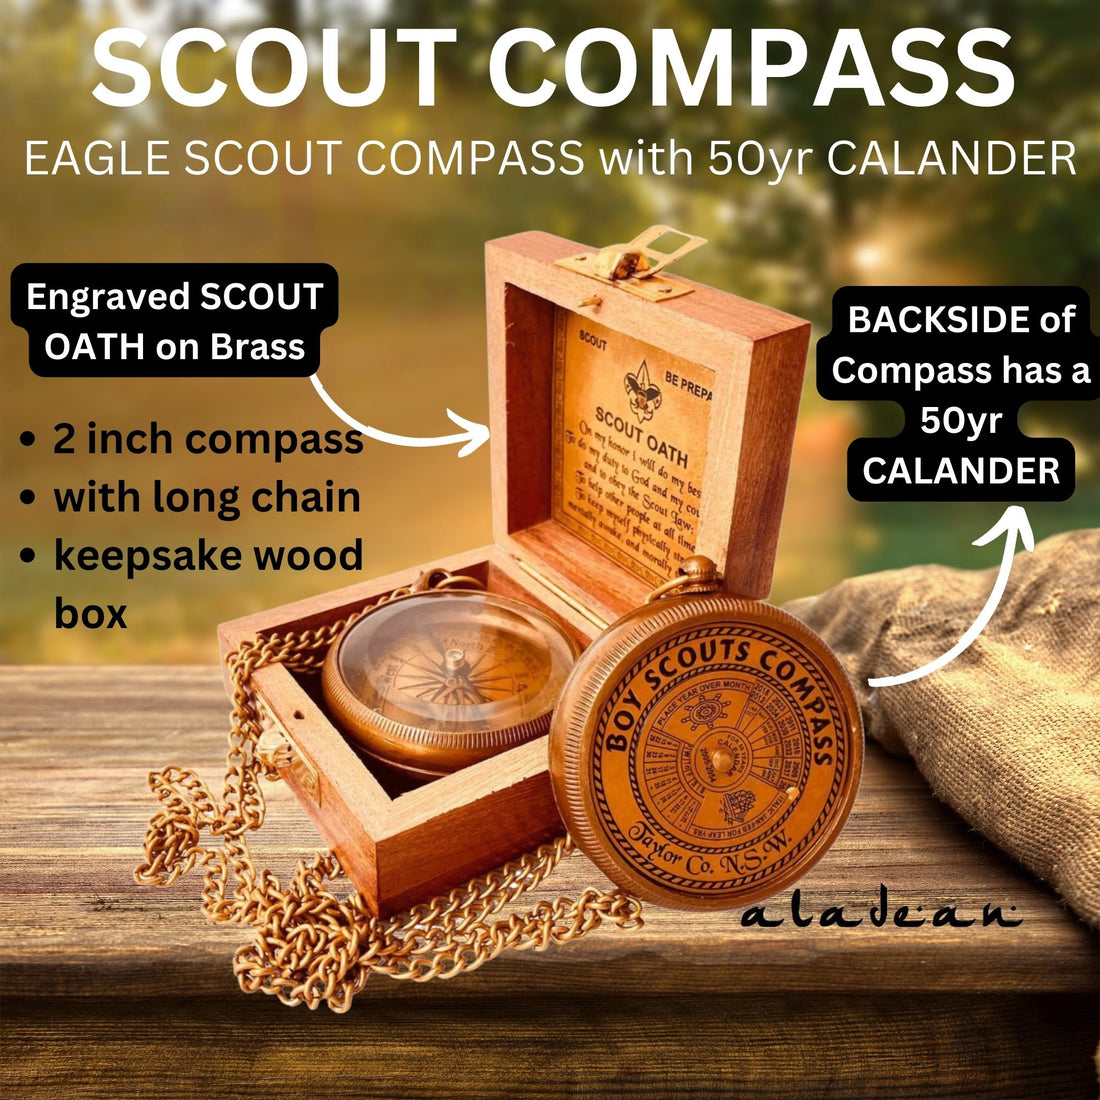 The Ultimate Eagle Scout Gift Options for the Elite Scout